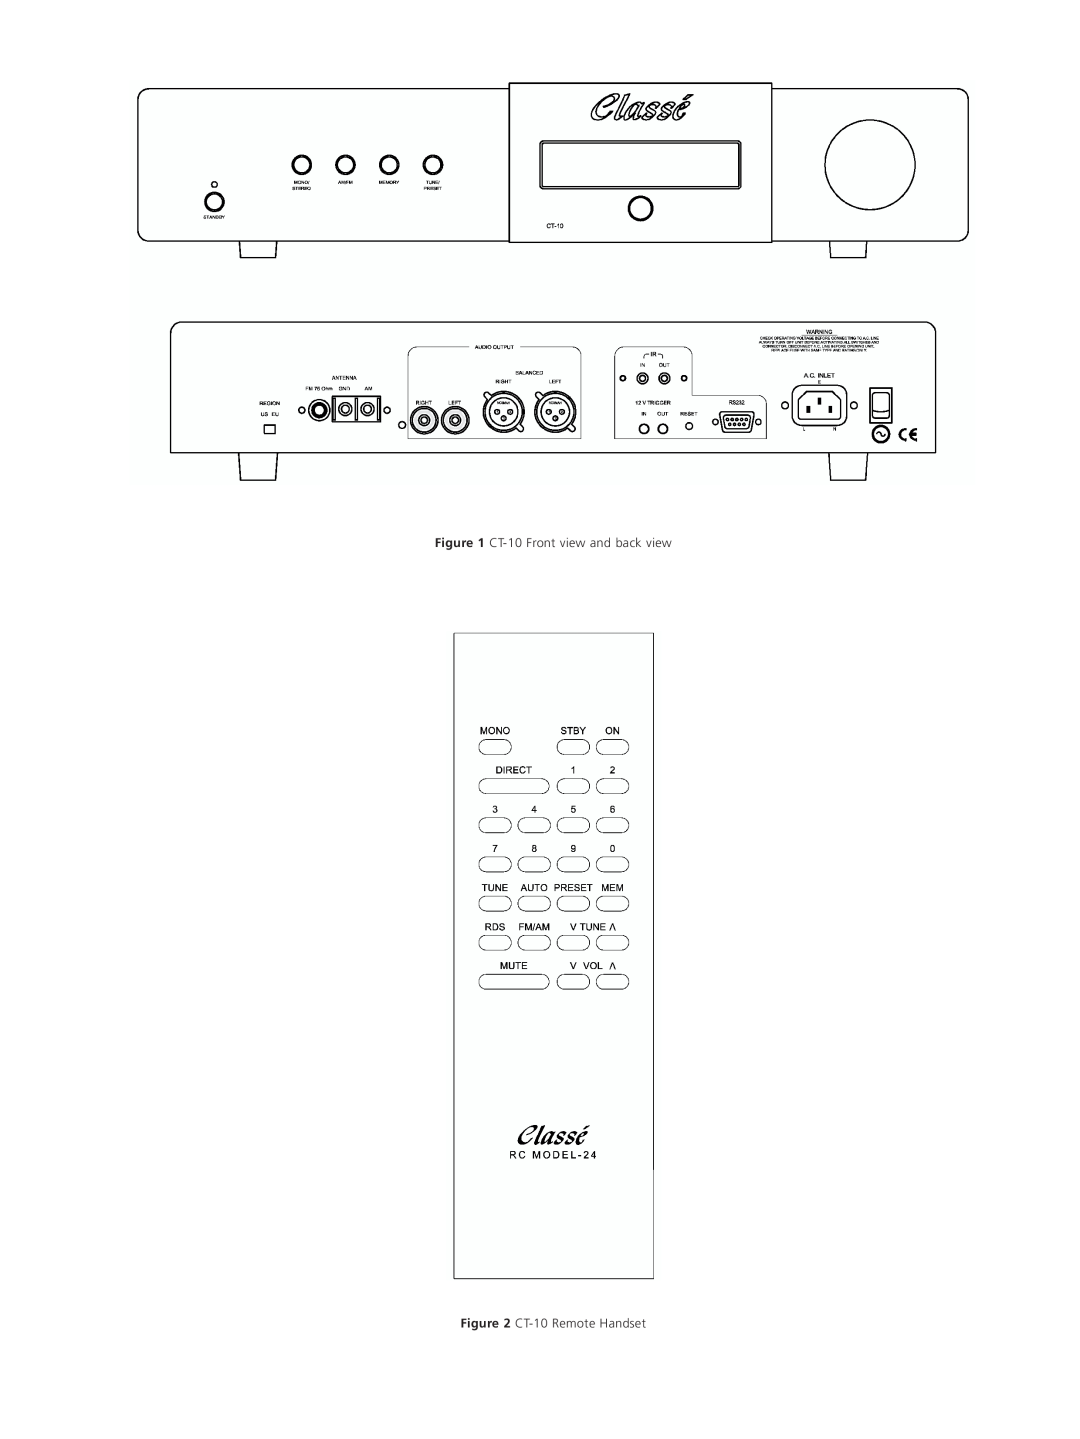 Classe Audio owner manual CT-10Front view and back view, CT-10Remote Handset 